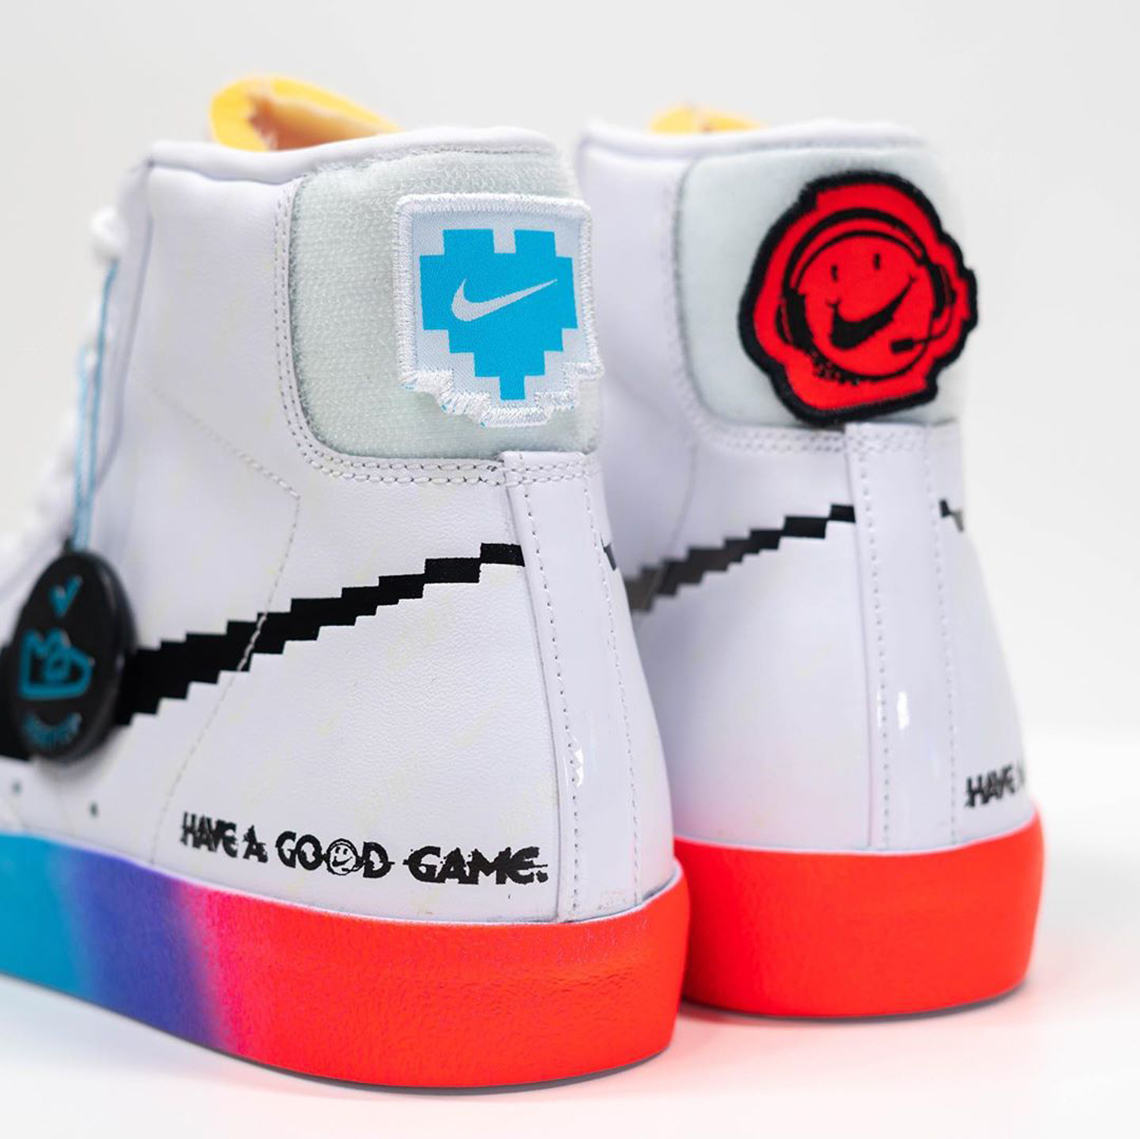 New Nikes Are A “Gamer” Tribute